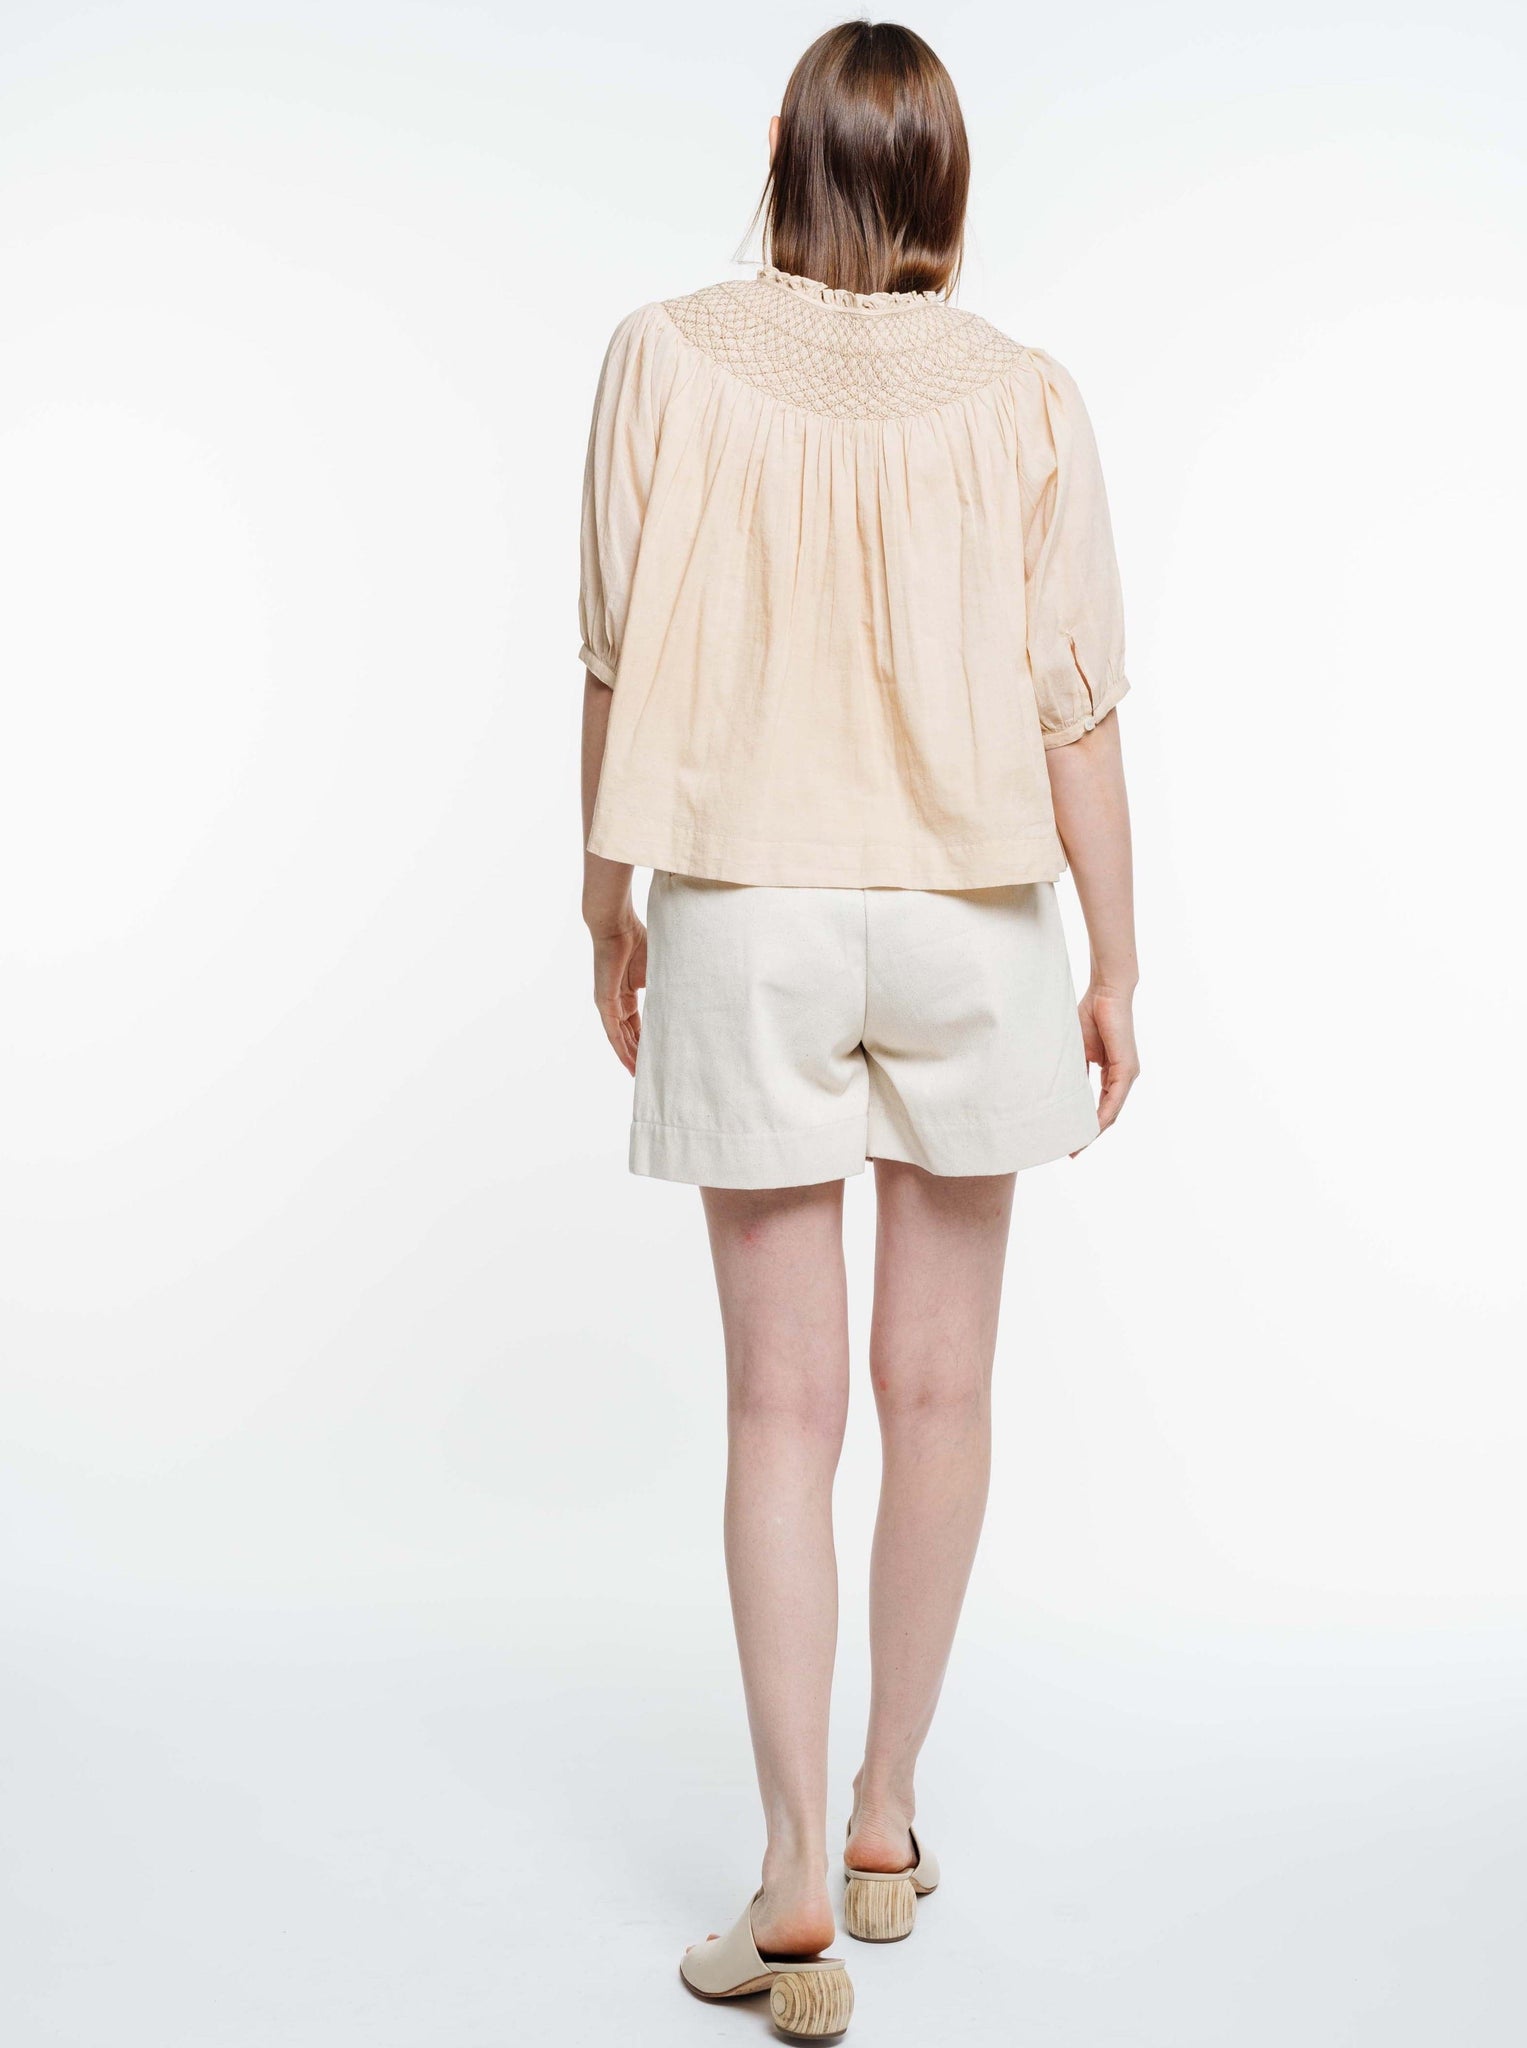 The back view of a woman wearing an organic cotton Lena Top - Acacia Wood.